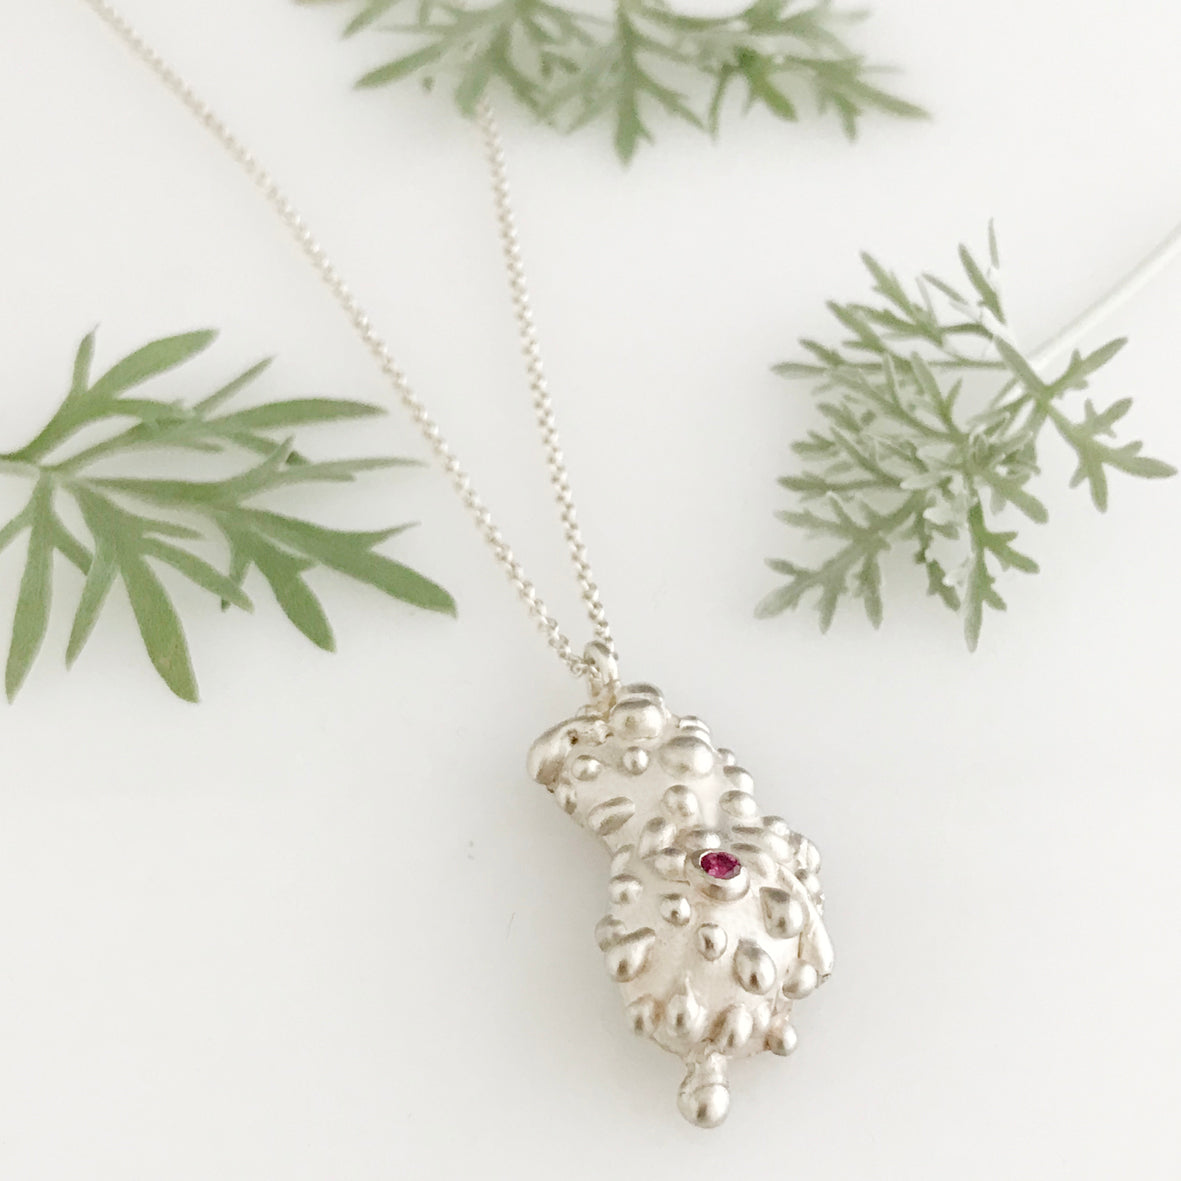 "Morning Dew' - Silver pendant with silver droplets and ruby